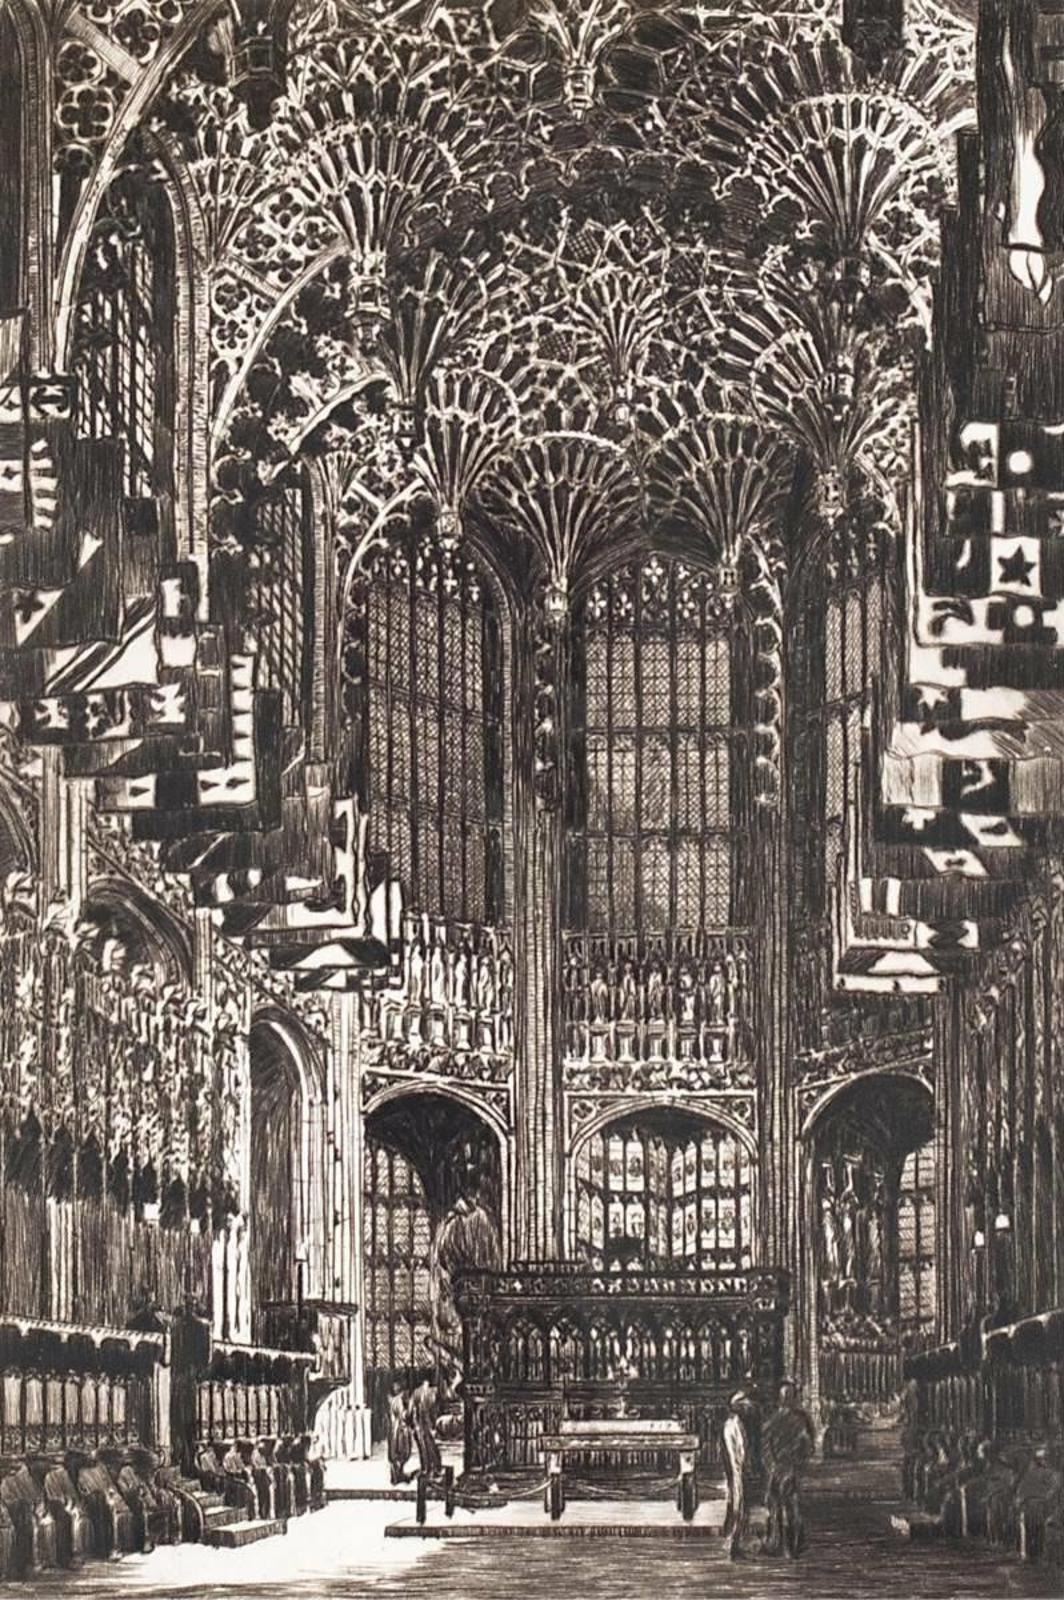 Sybil Andrews (1898-1992) - King Henry Vii Chapel, Westminster Abbey